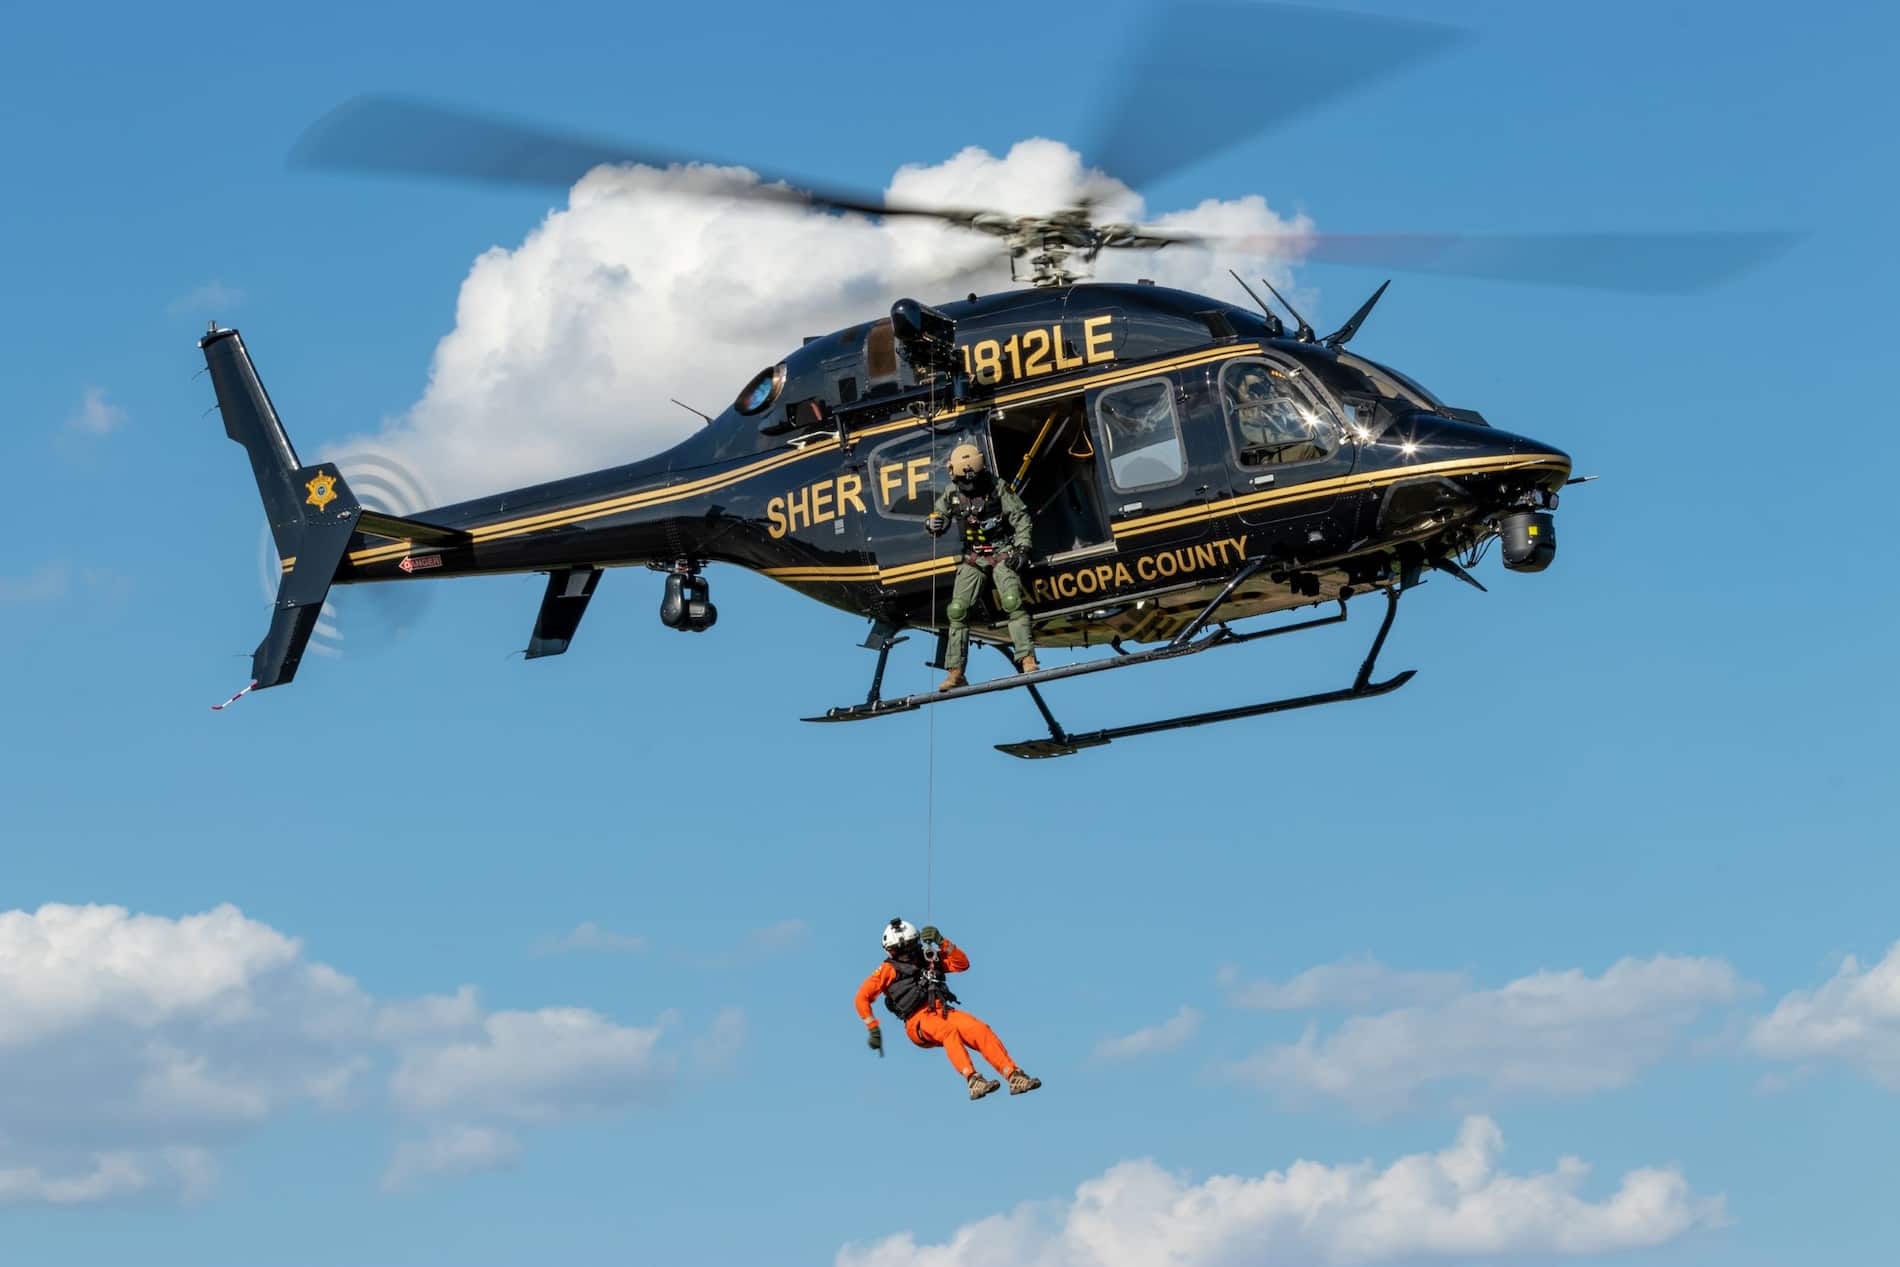 Bell Helicopters for Public Safety, Search & Rescue and Law Enforcement